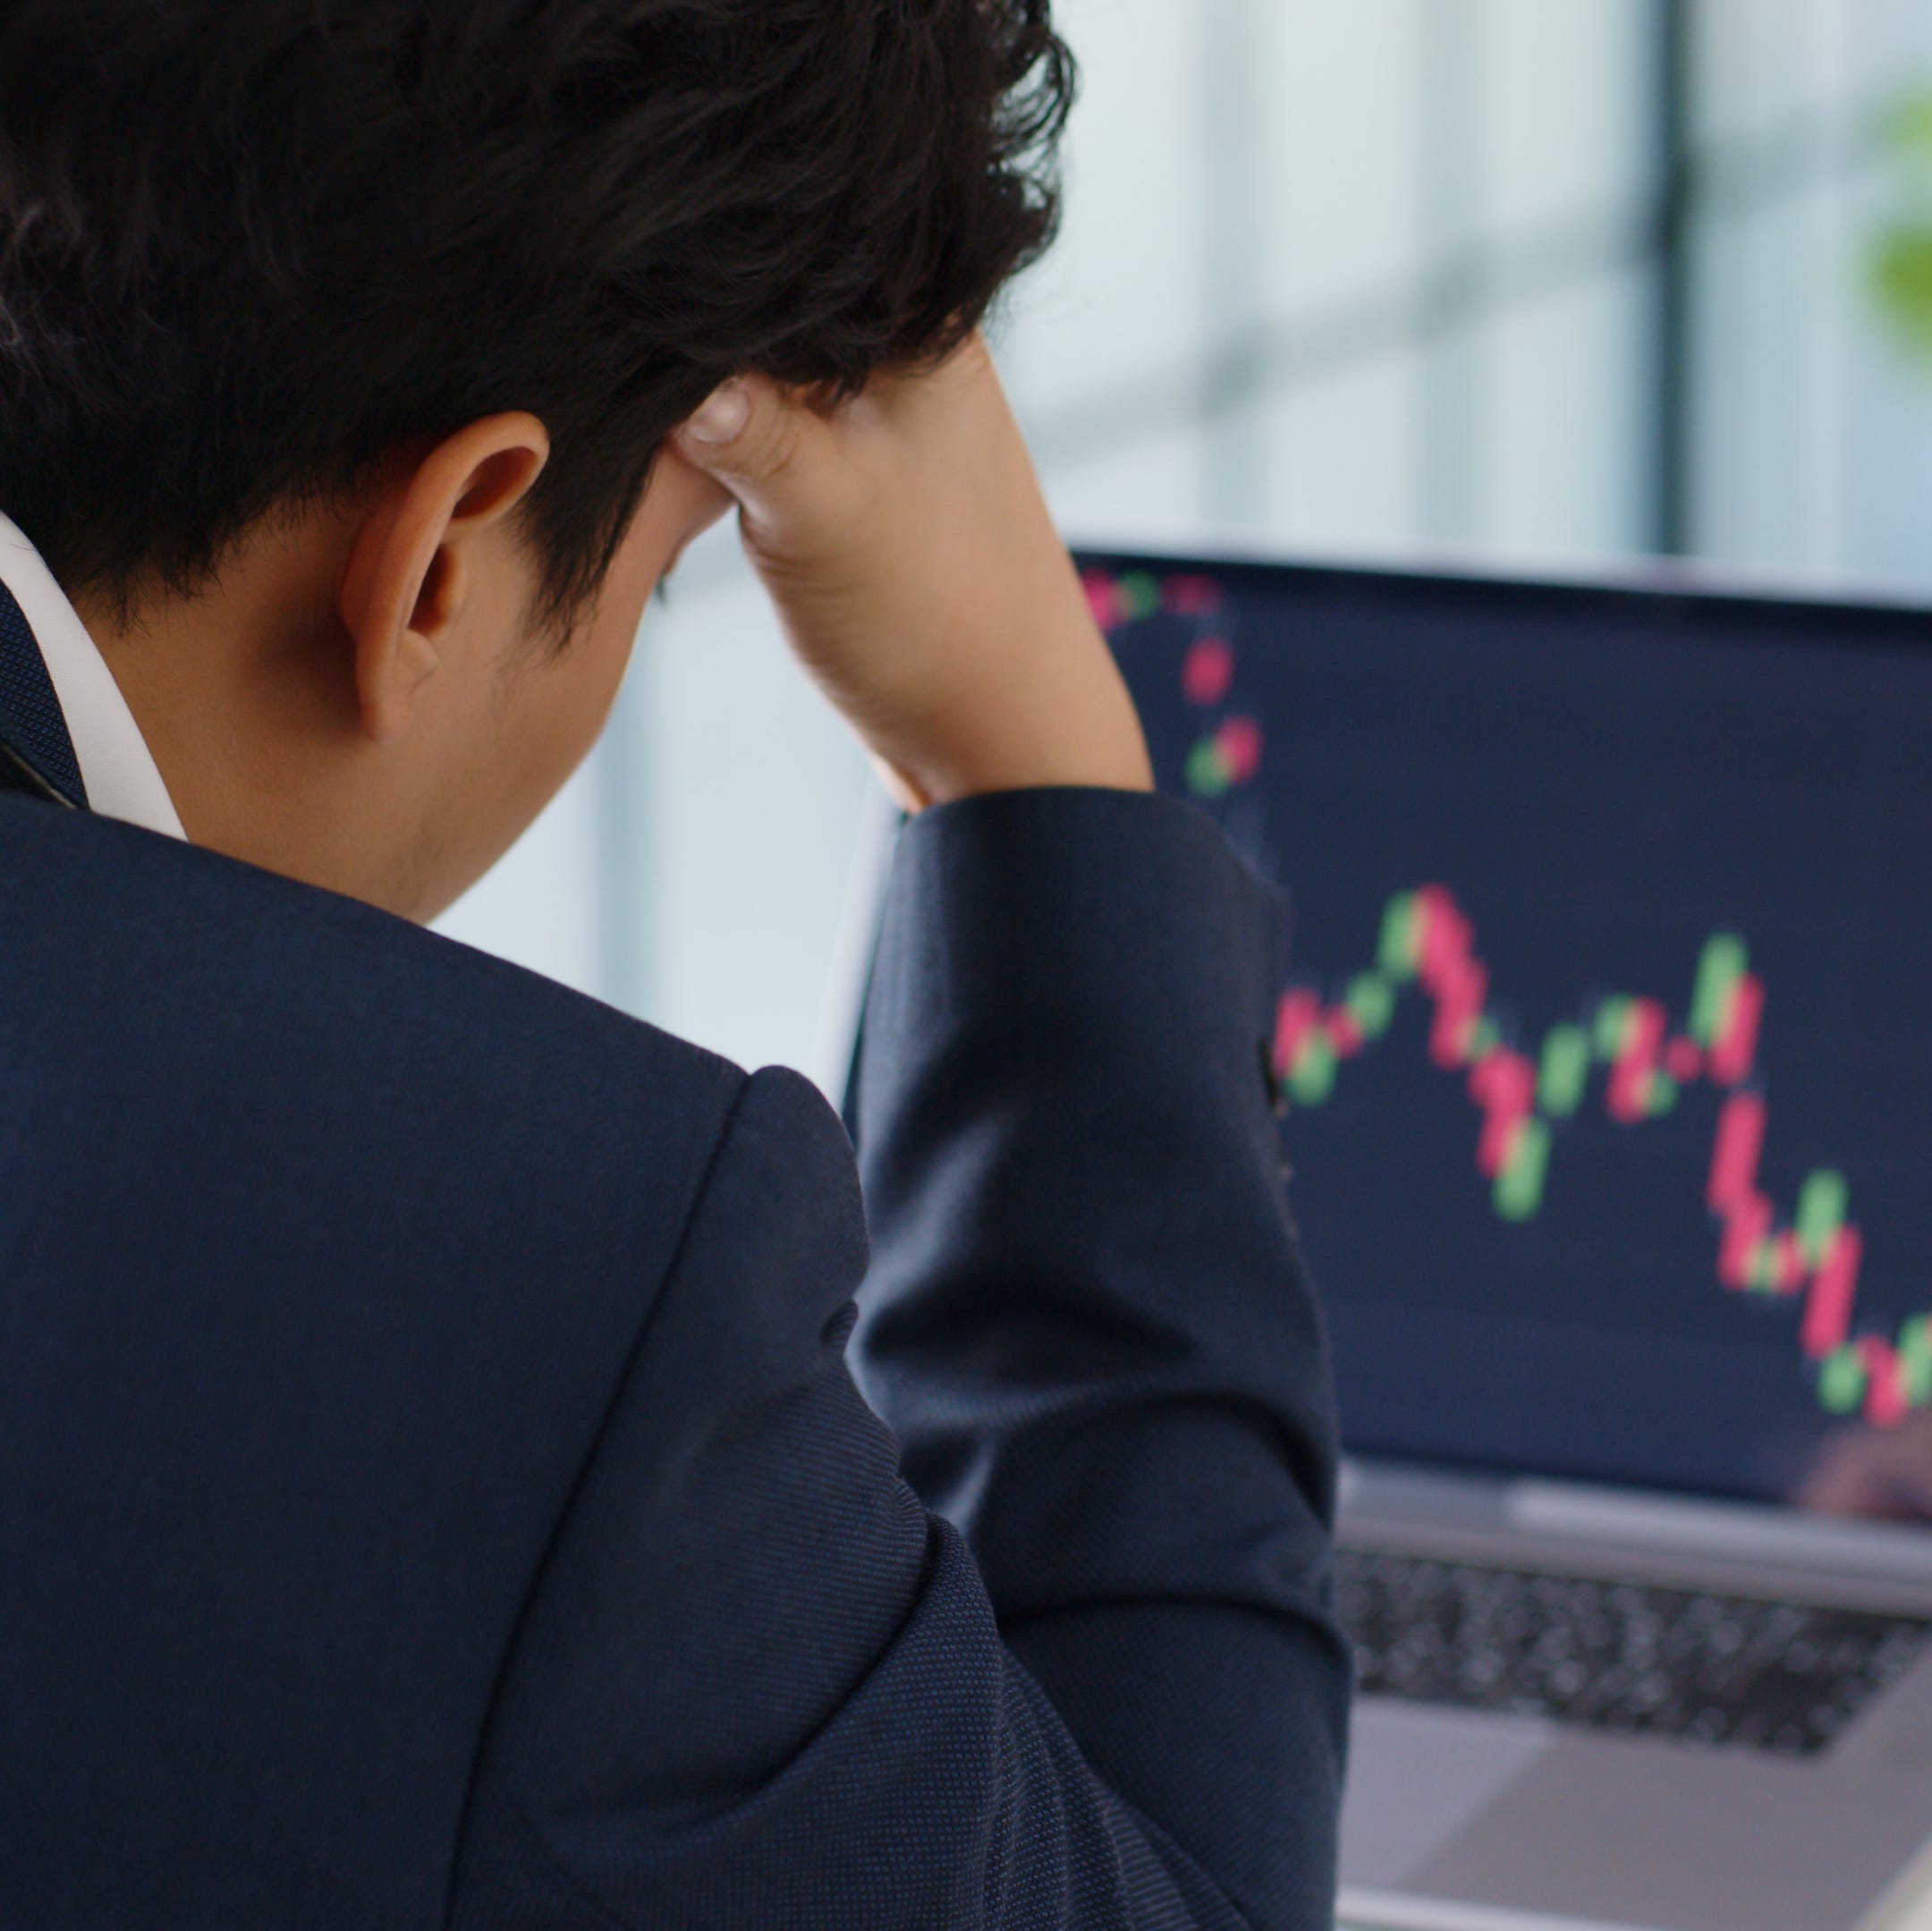 Person looking at downward stock chart on computer.